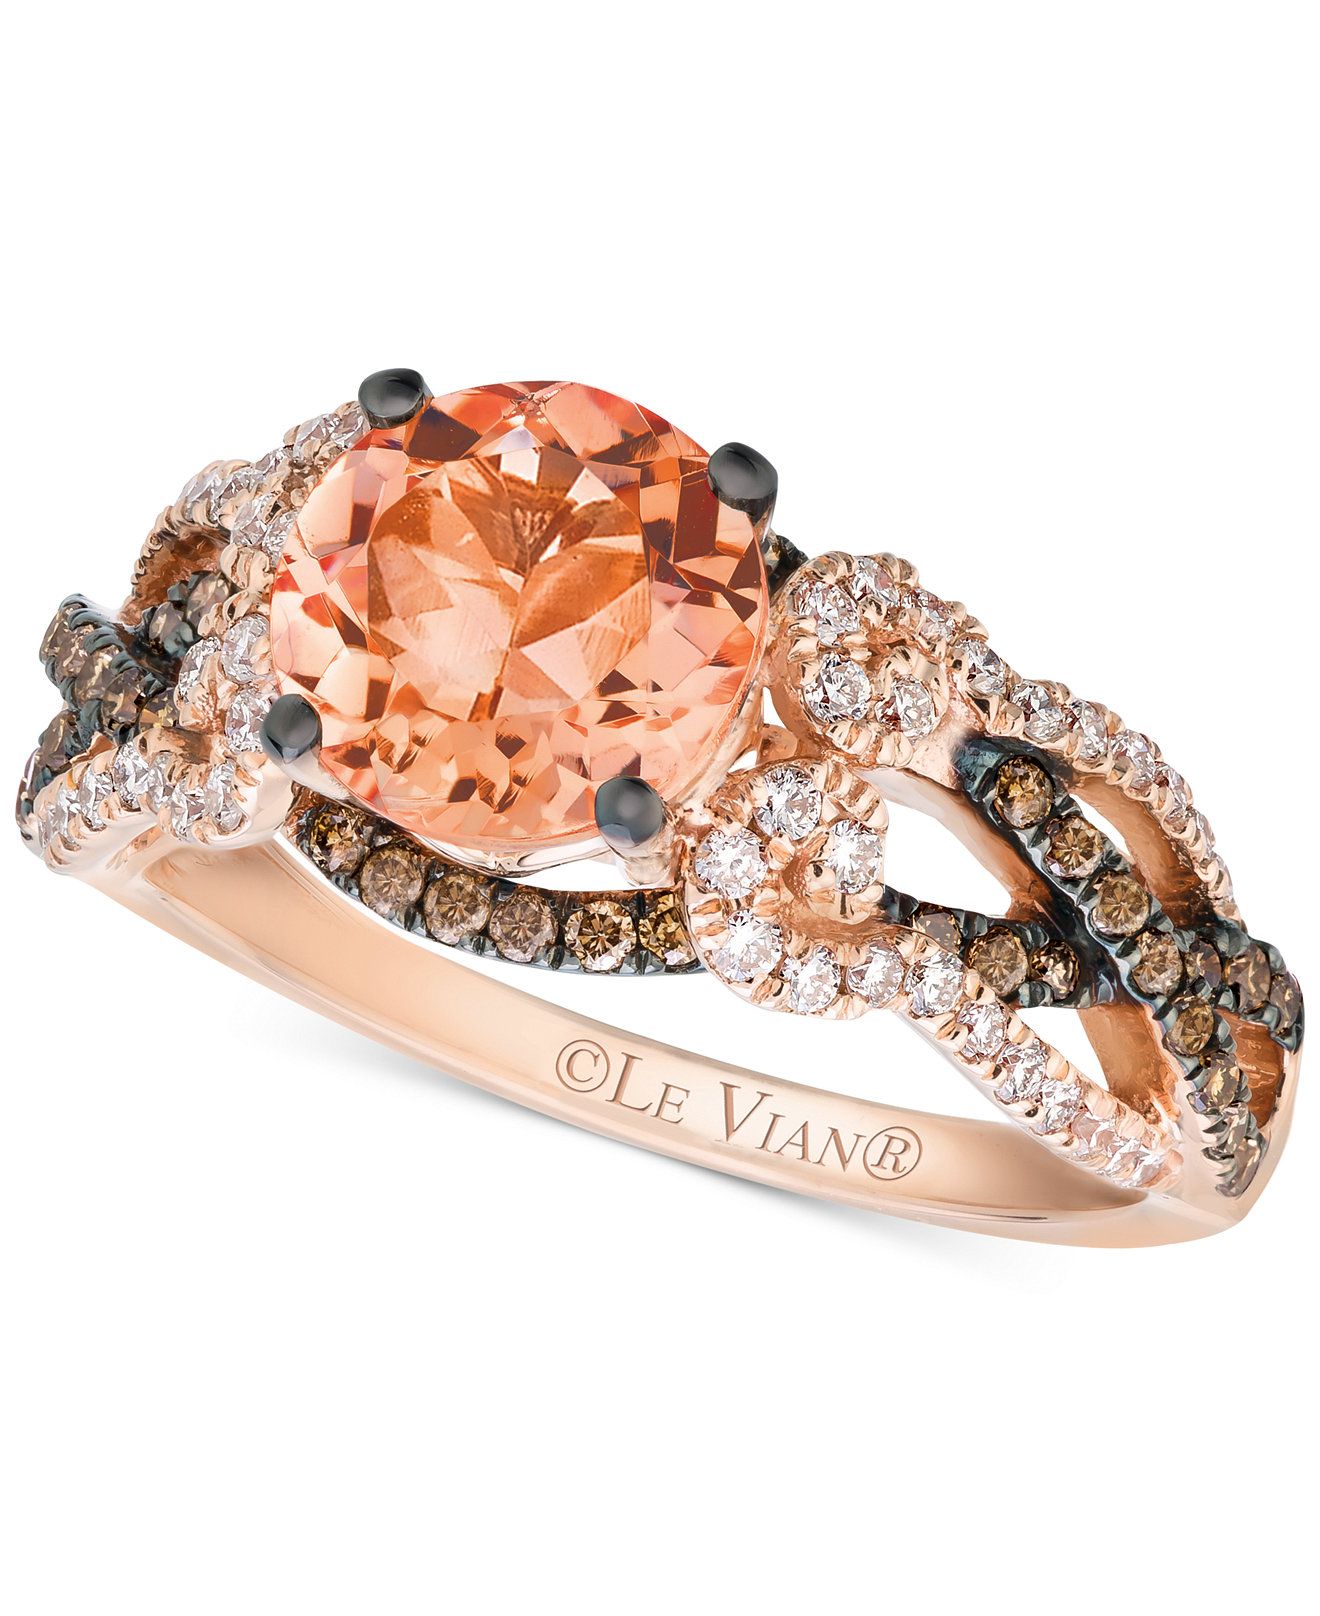 Le Vian Peach Morganite (1-3/8 ct. t.w.) and Diamond (5/8 ct. t.w.) Ring in 14k Rose Gold & Reviews - Rings - Jewelry & Watches - Macy's